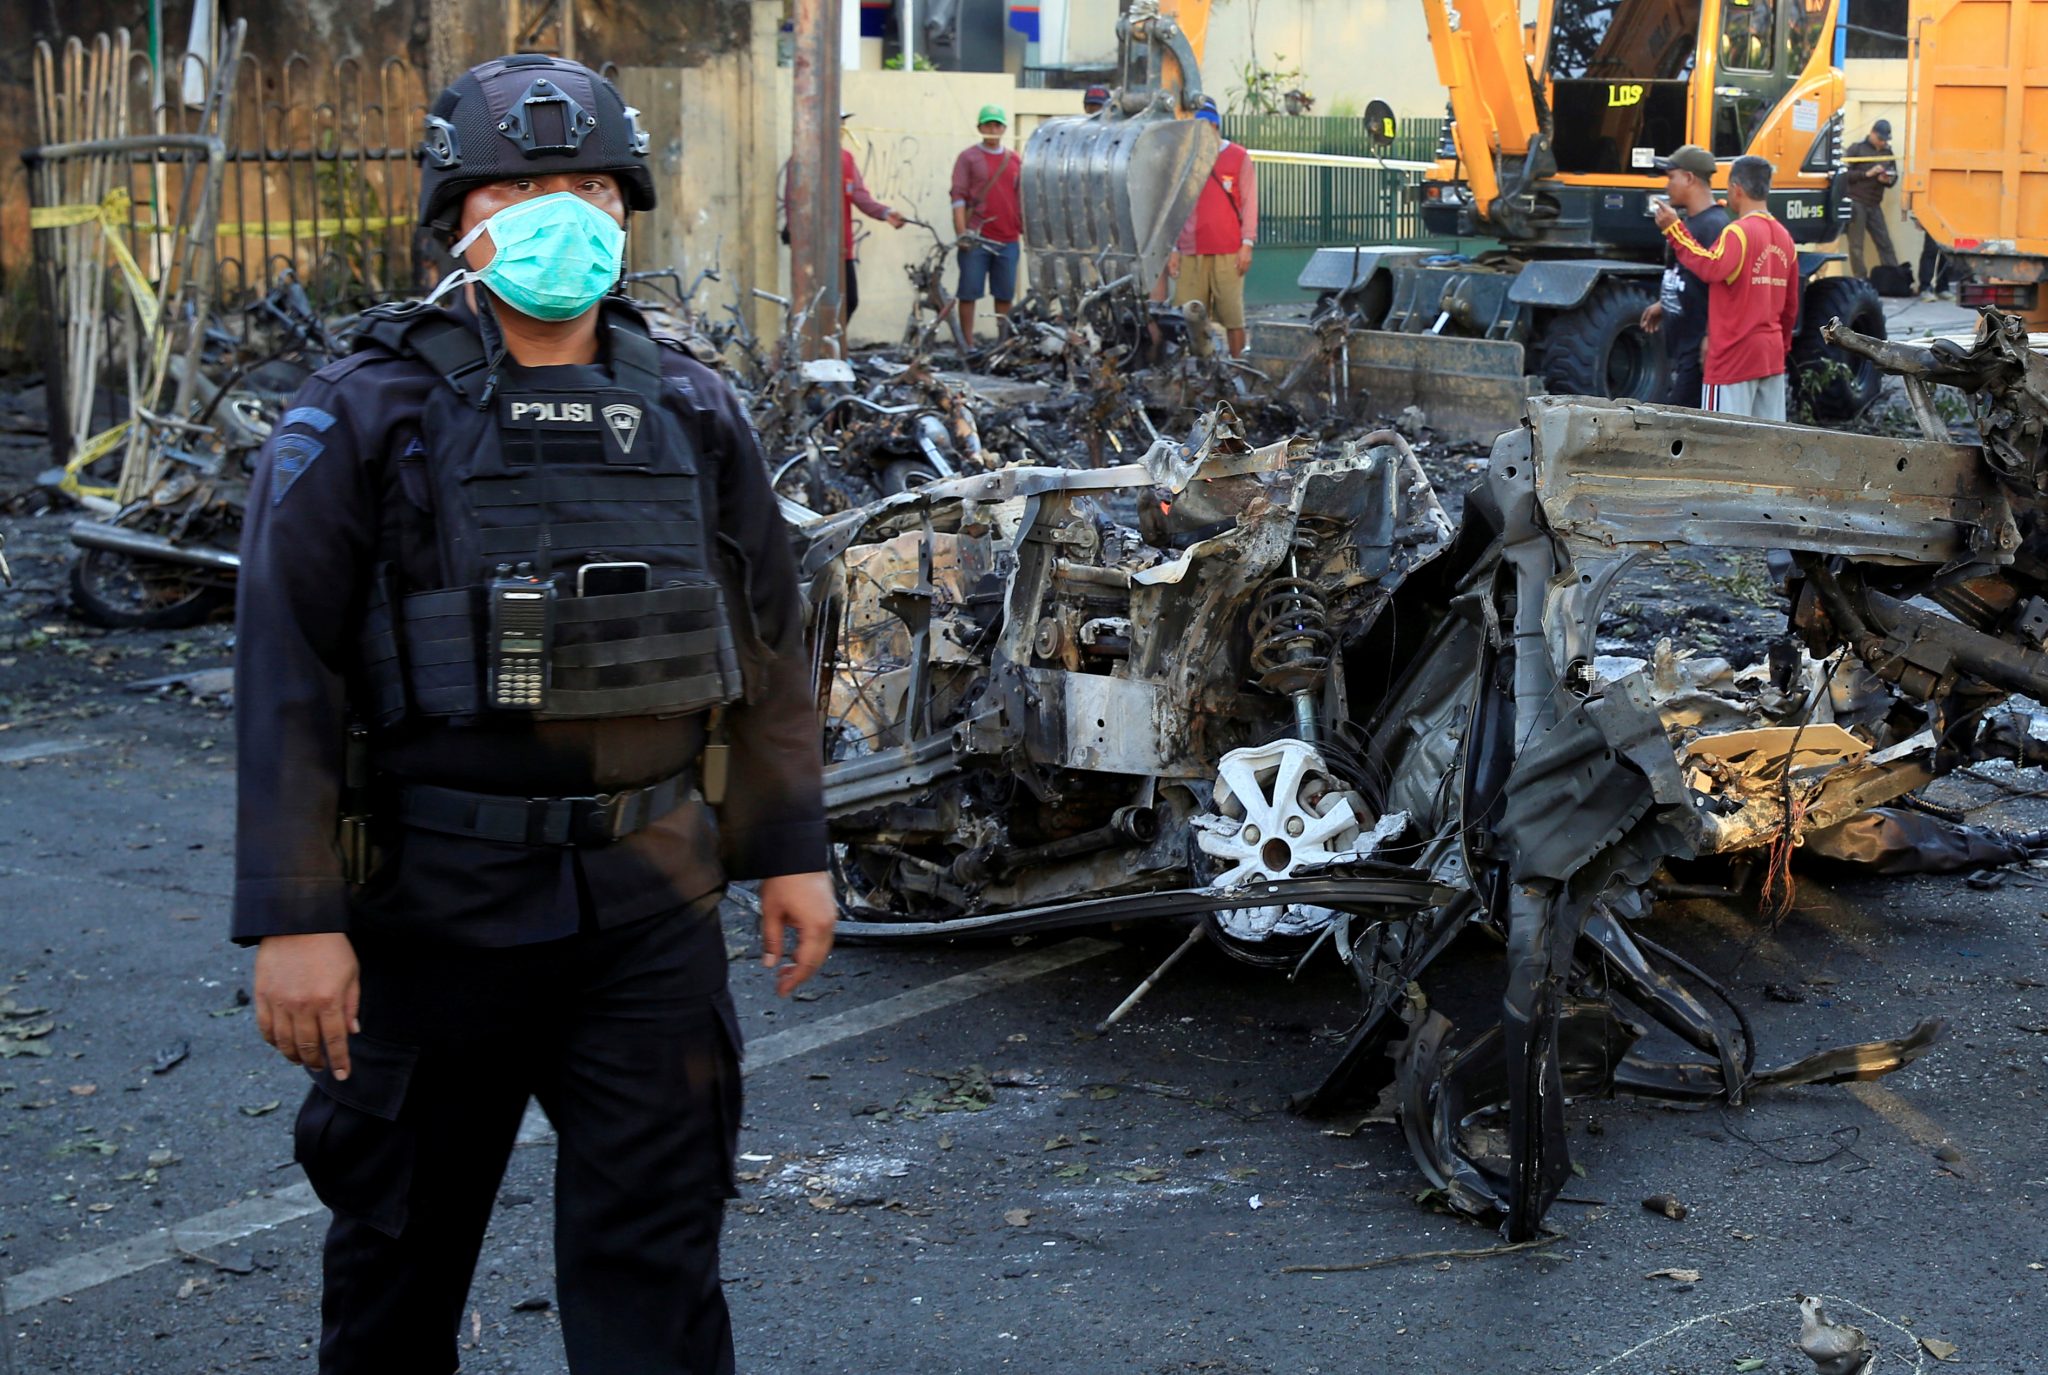 Indonesian Special Forces Police stands near the car wreck that crashed into the church in Surabaya | REUTERS